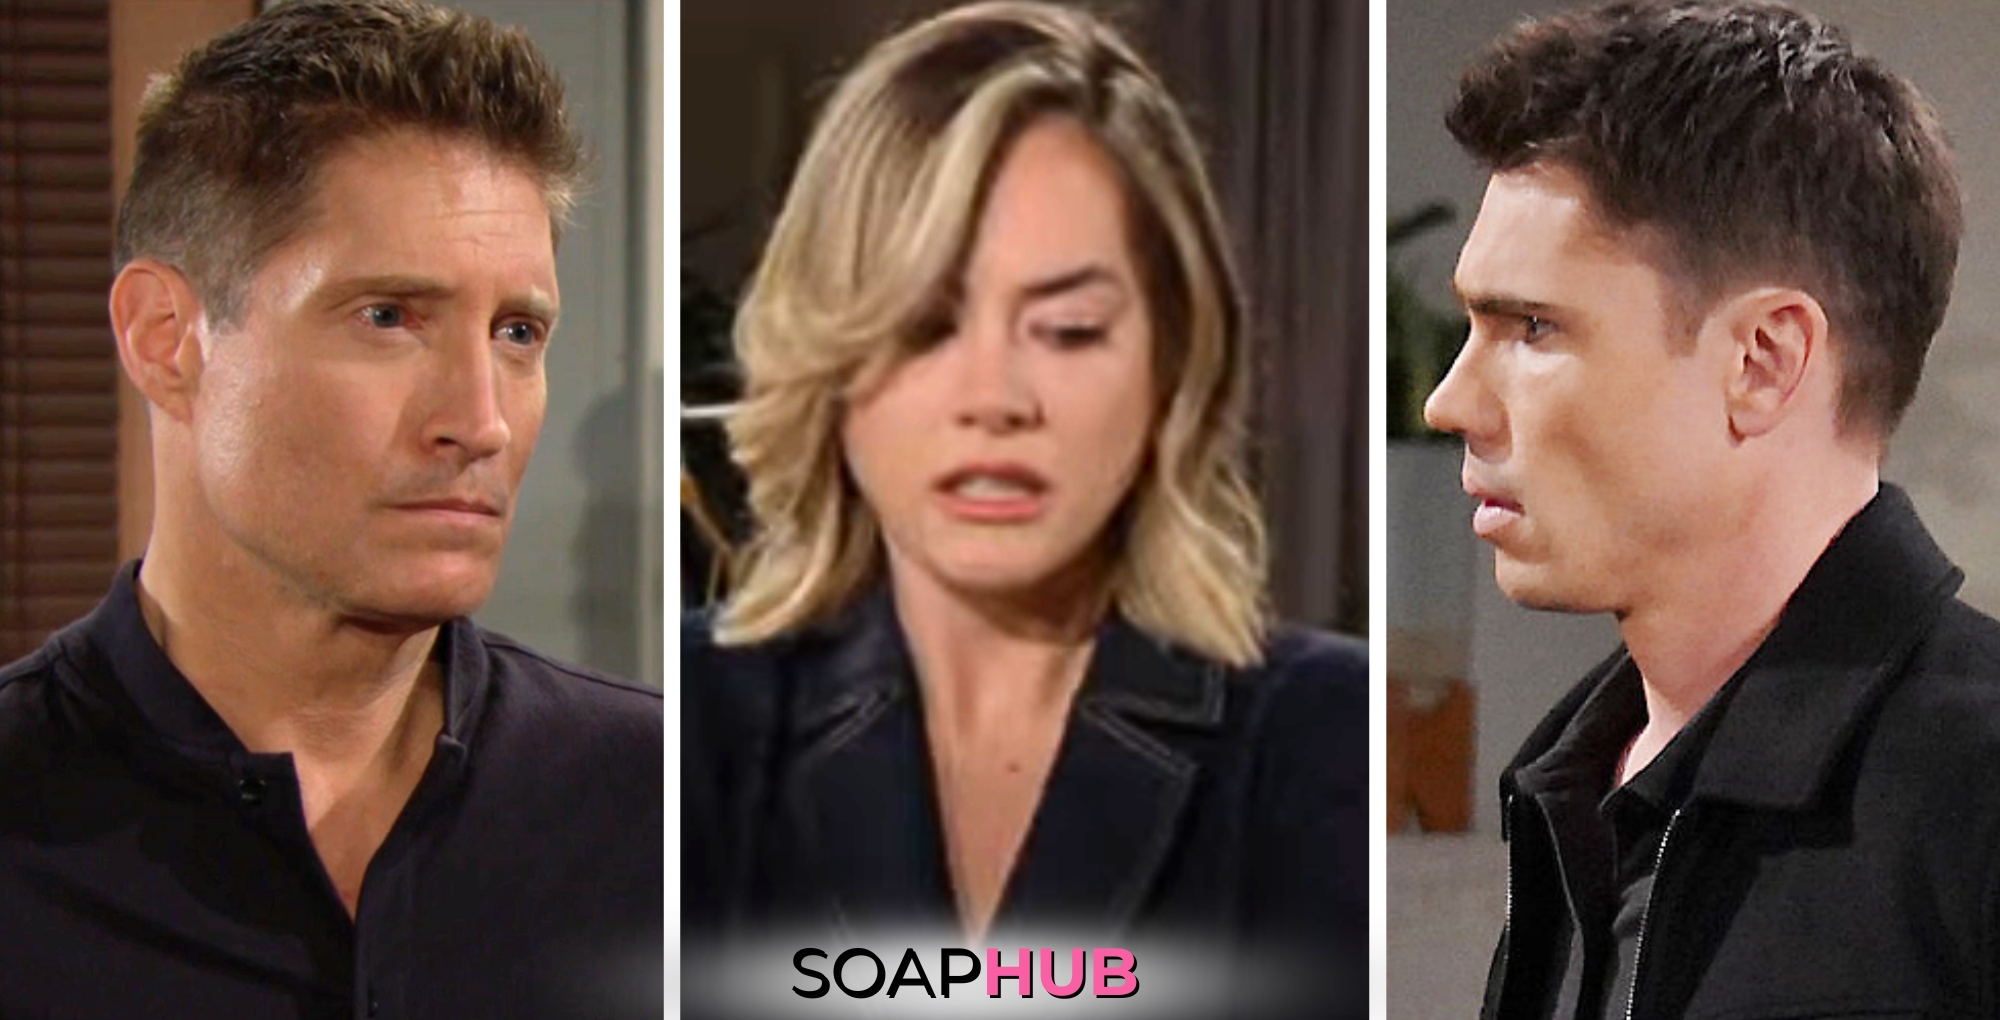 Bold and the Beautiful Weekly Spoilers for the Week of April 1 - 5 Episode 9240 - 9244 Feature Deacon, Hope and Finn With the Soap Hub Logo Across the Bottom